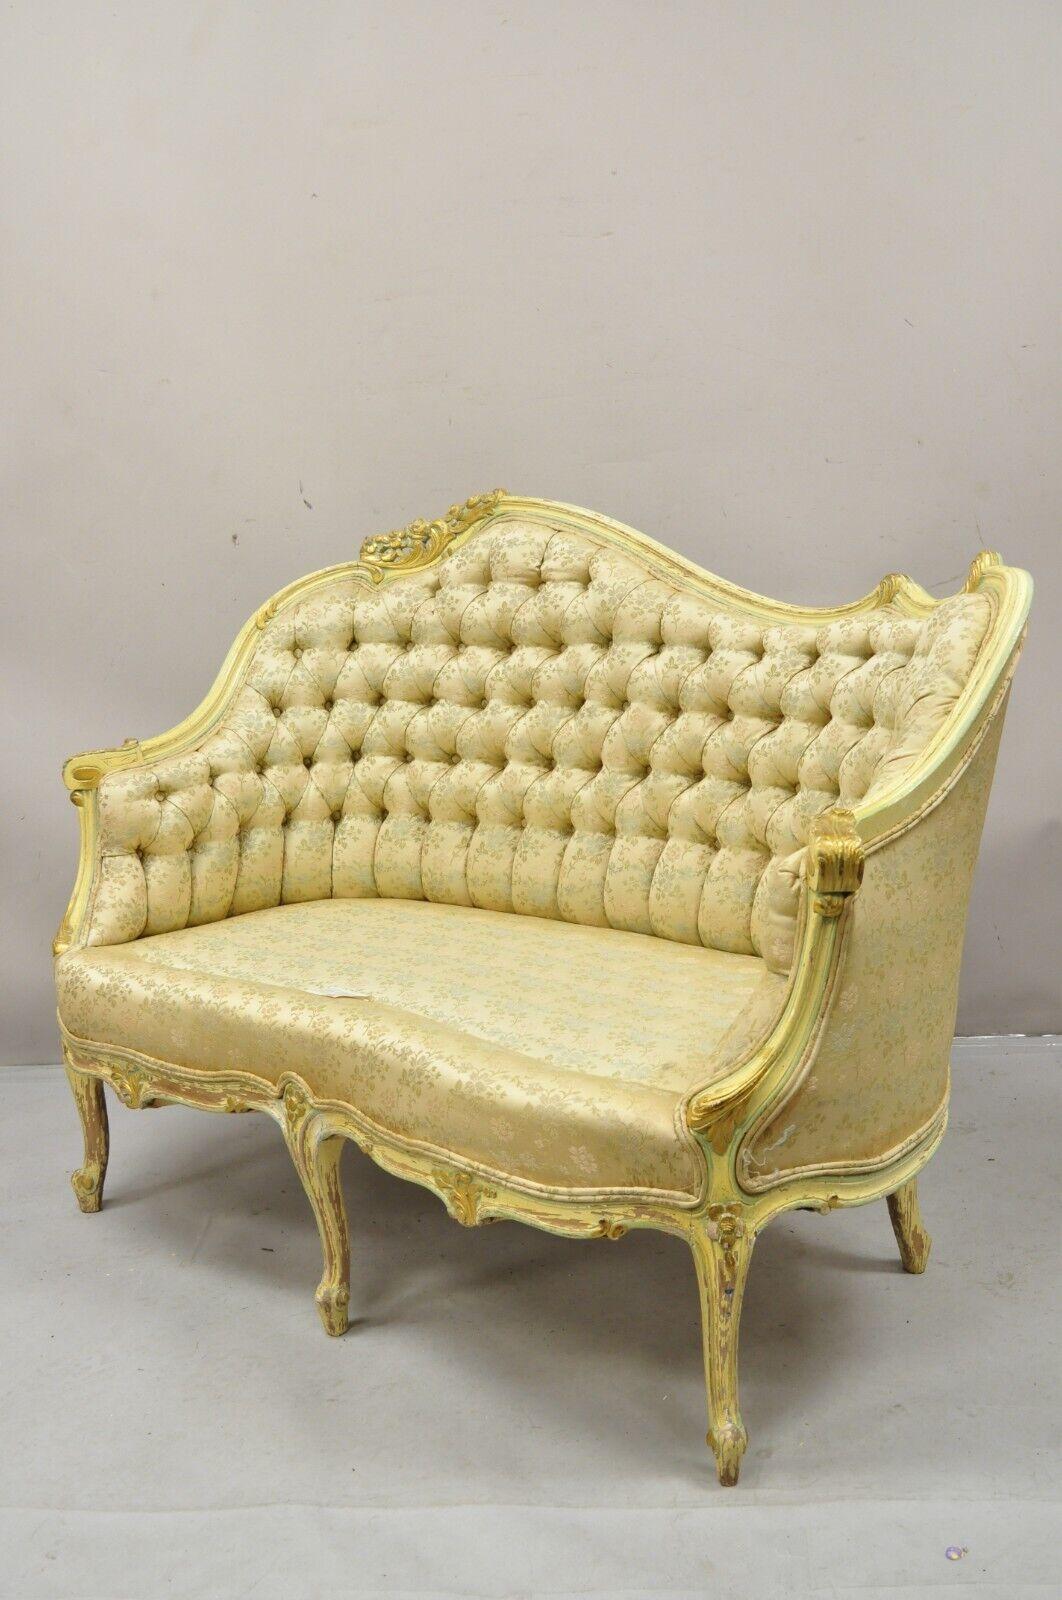 Vintage French Louis XV Rococo Style Yellow & Green Settee Loveseat Sofa For Sale 6